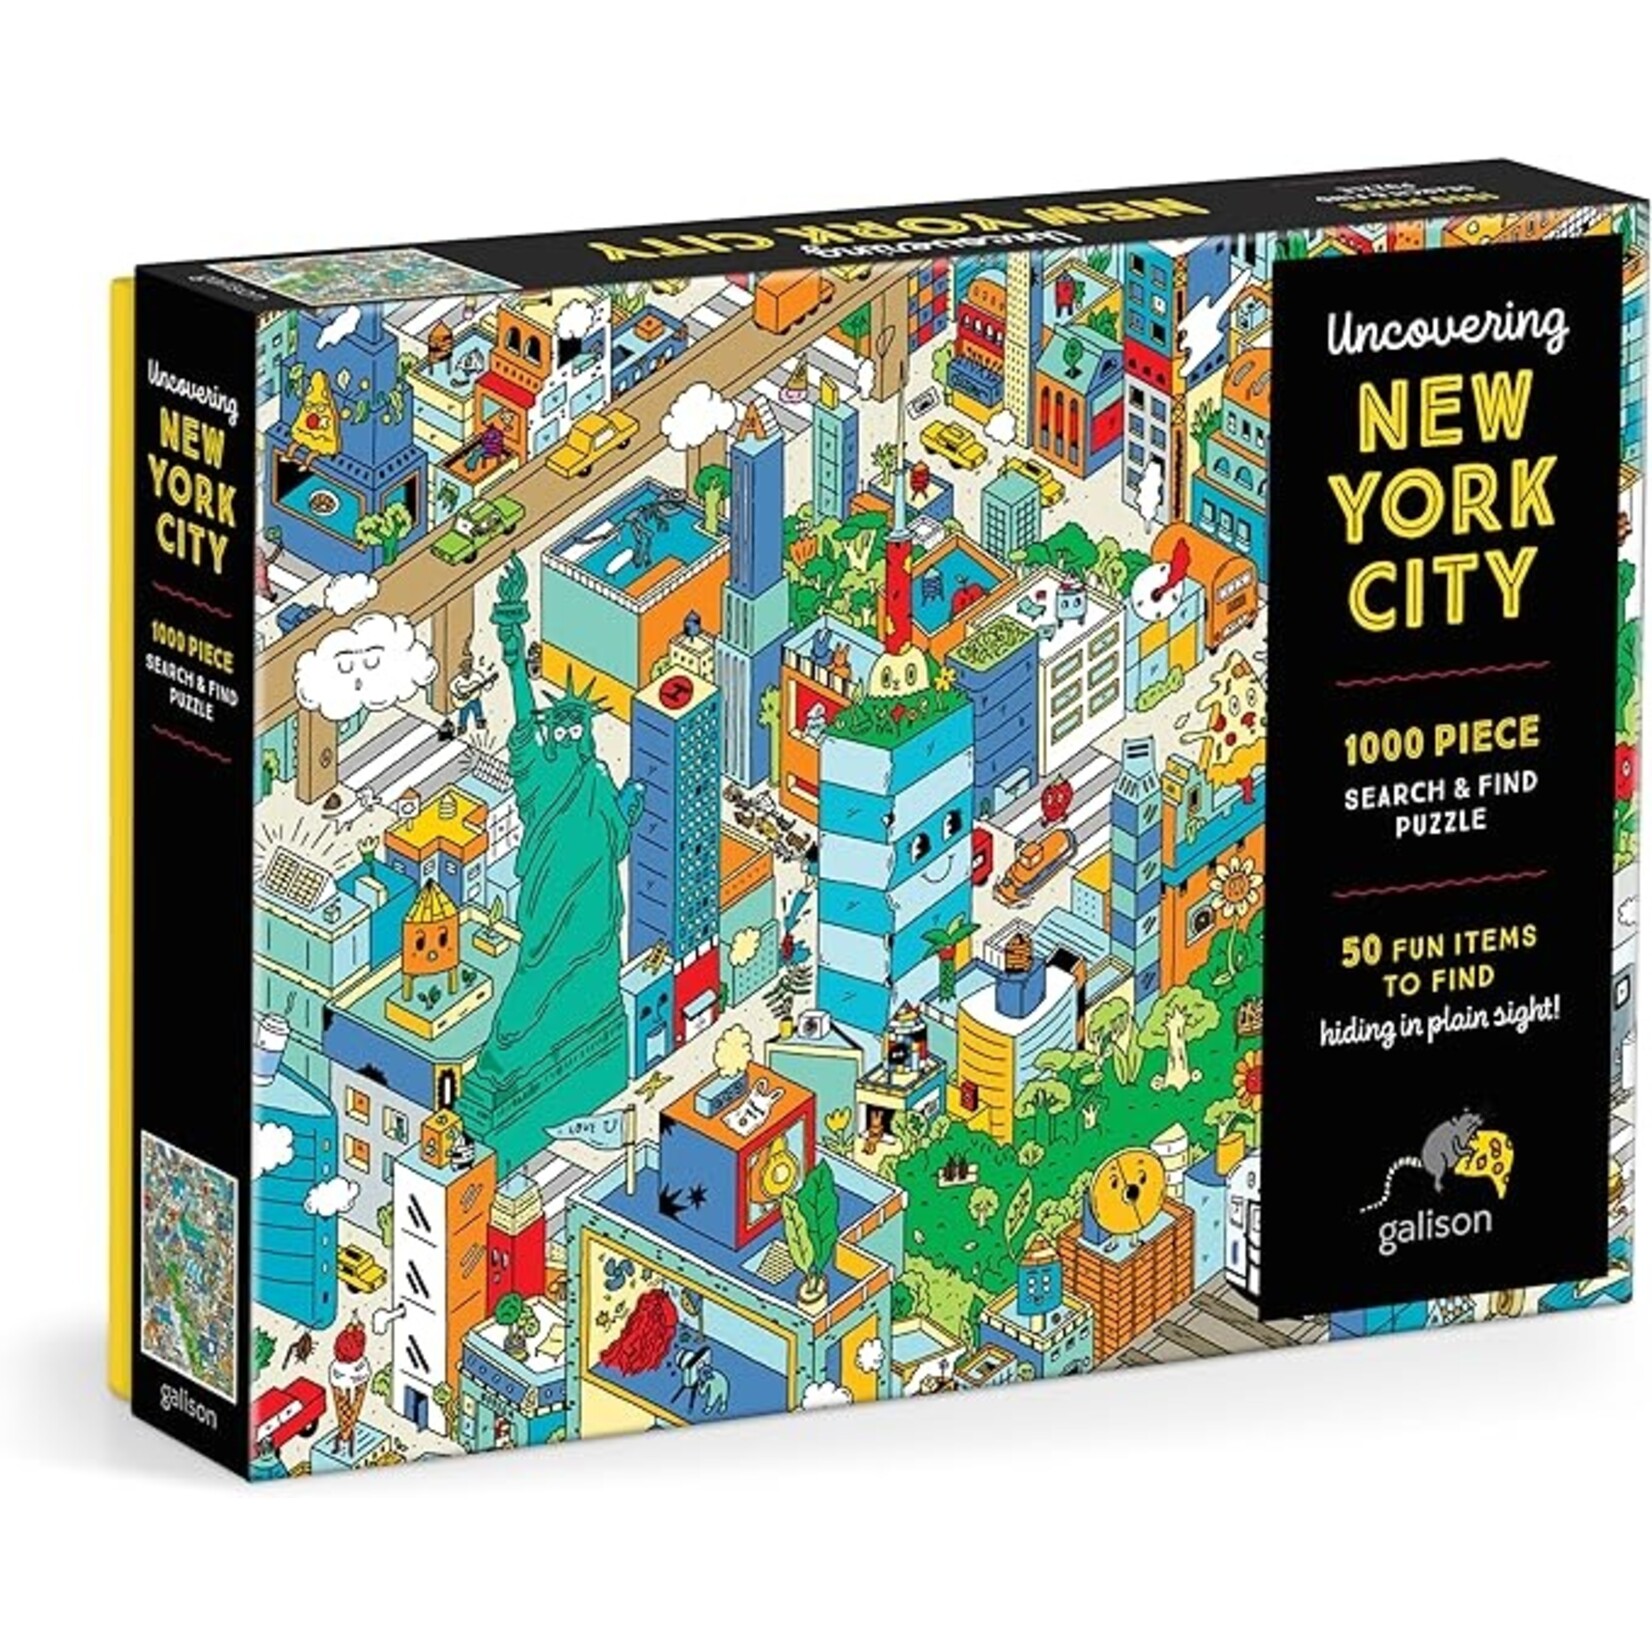 New York Search & Find Puzzle